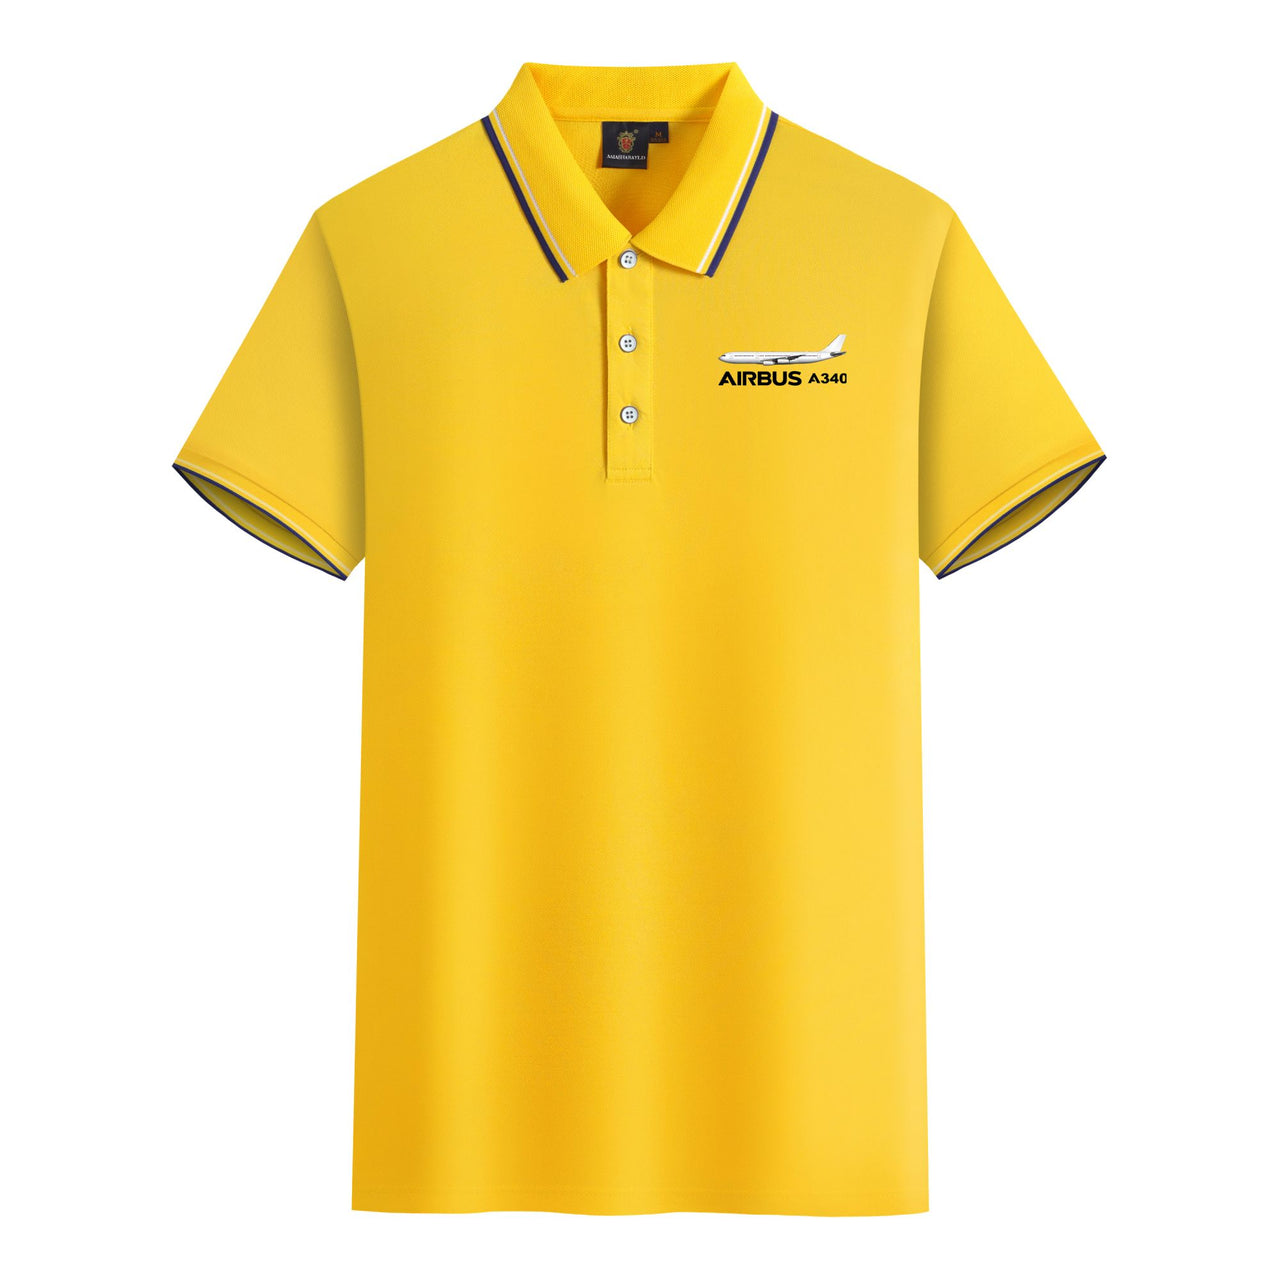 The Airbus A340 Designed Stylish Polo T-Shirts